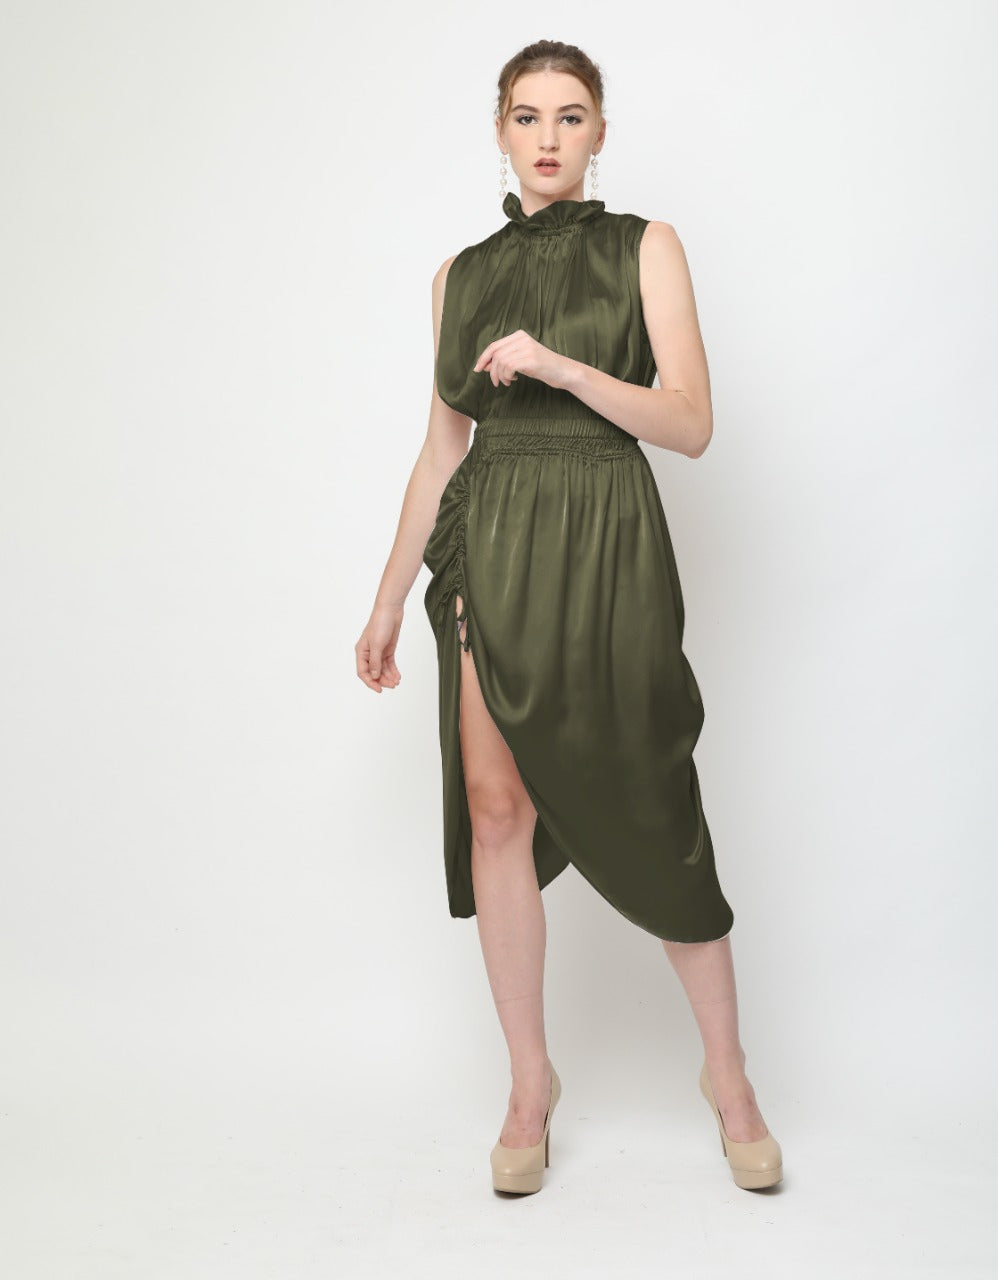 Ava. Arched Dress - Green Army